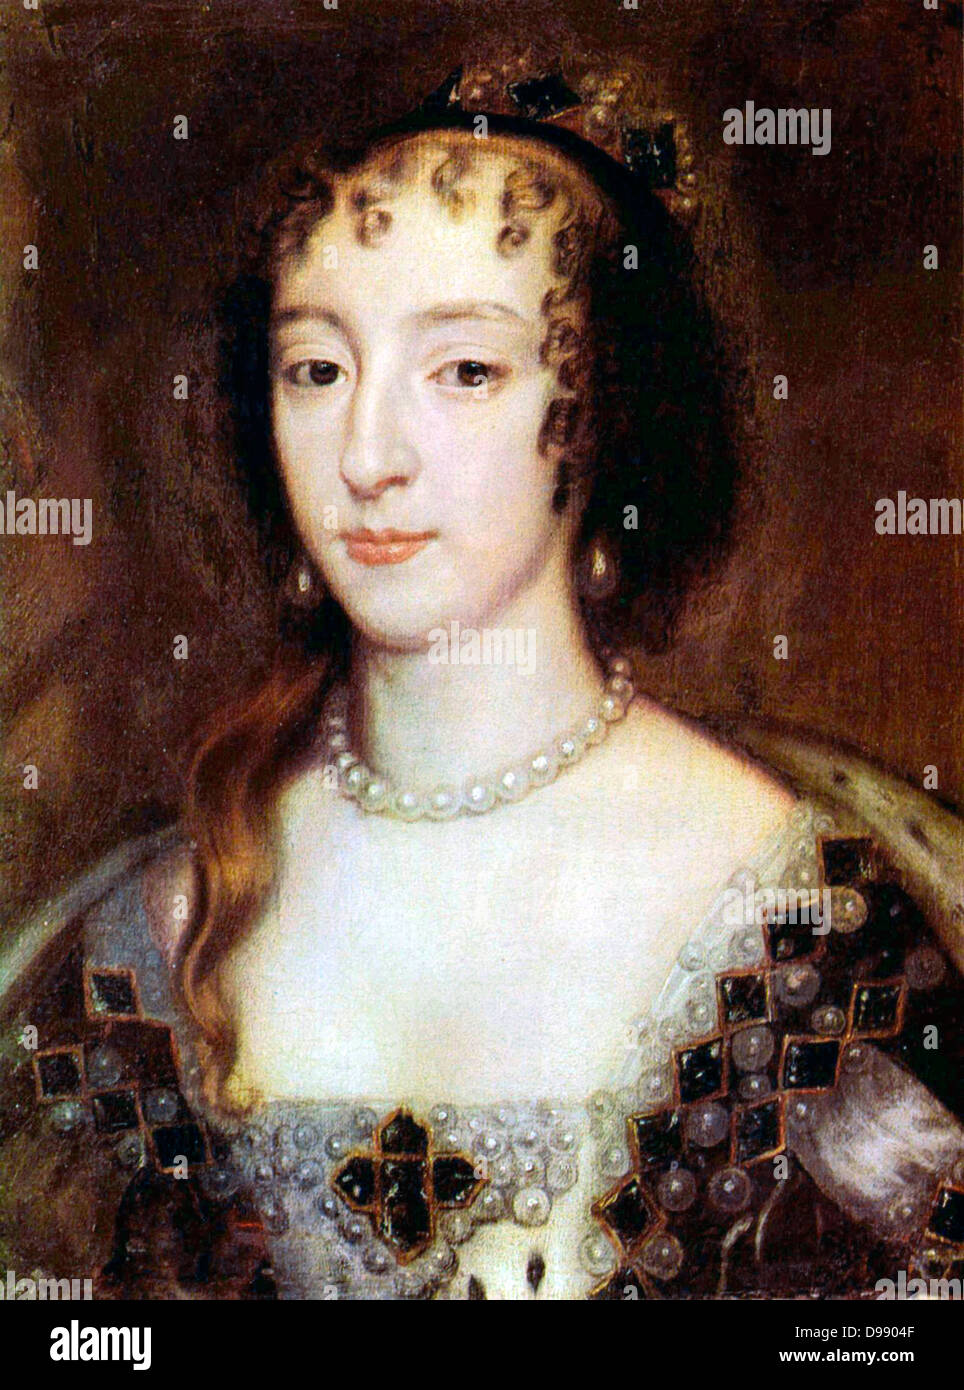 Henrietta Maria of France (French: Henriette Marie de France); (25 November[1] 1609 – 10 September 1669) was the Queen consort of England, Scotland, and Ireland as the wife of King Charles I. She was mother of two kings, Charles II and James II, 1660 Stock Photo